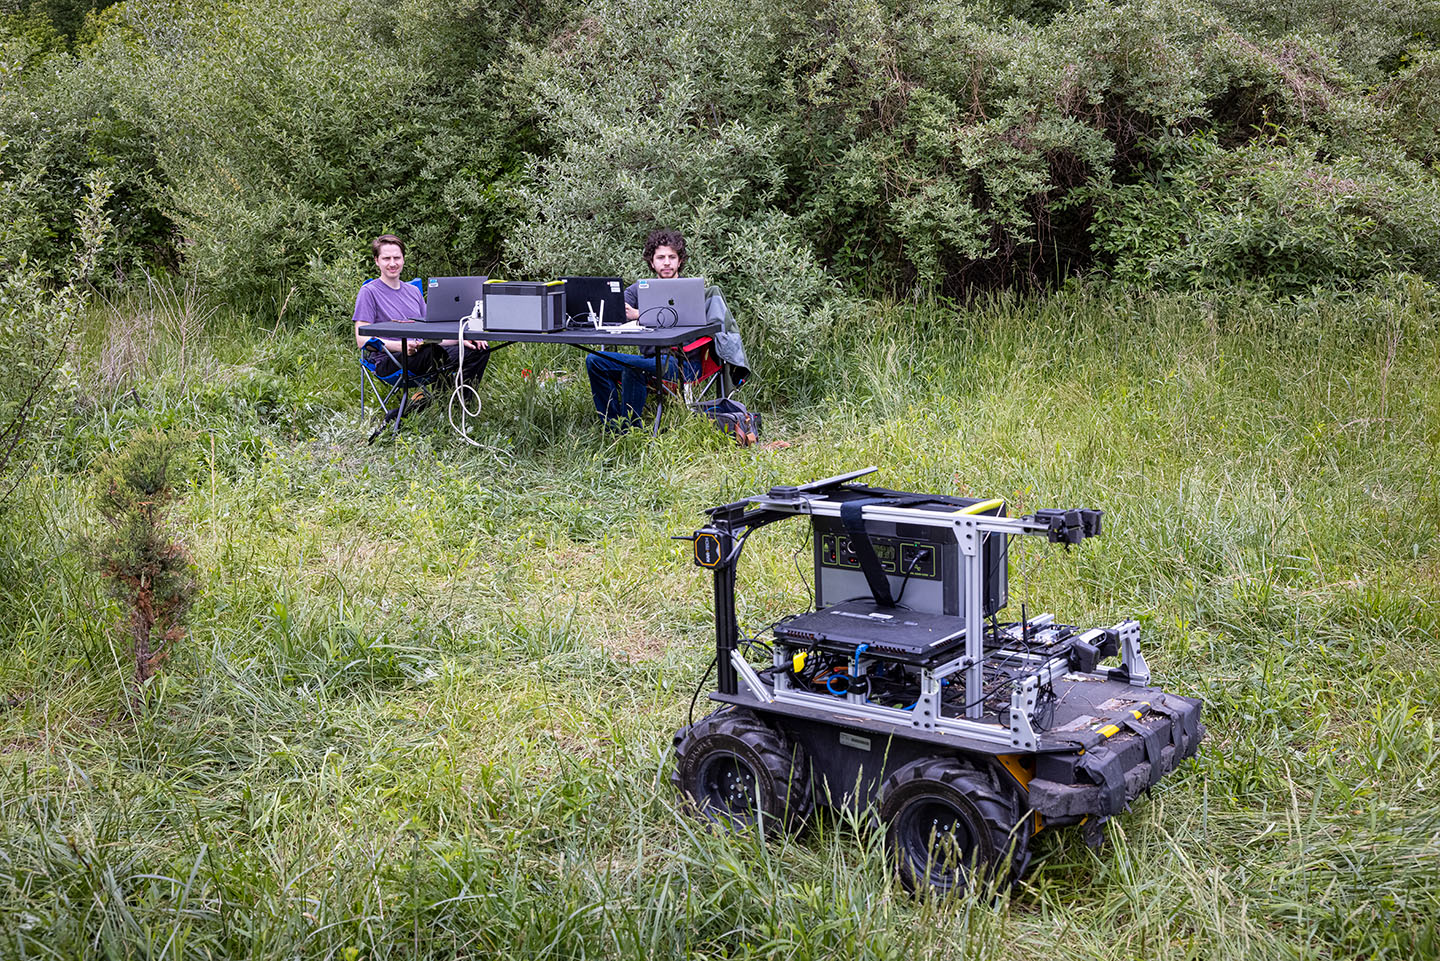 Robotics researchers Craig Knuth and Adam Polevoy test machine learning algorithms for estimating traversable regions in complex environments. Such algorithms are necessary to enable robotic systems to autonomously traverse complex terrain.